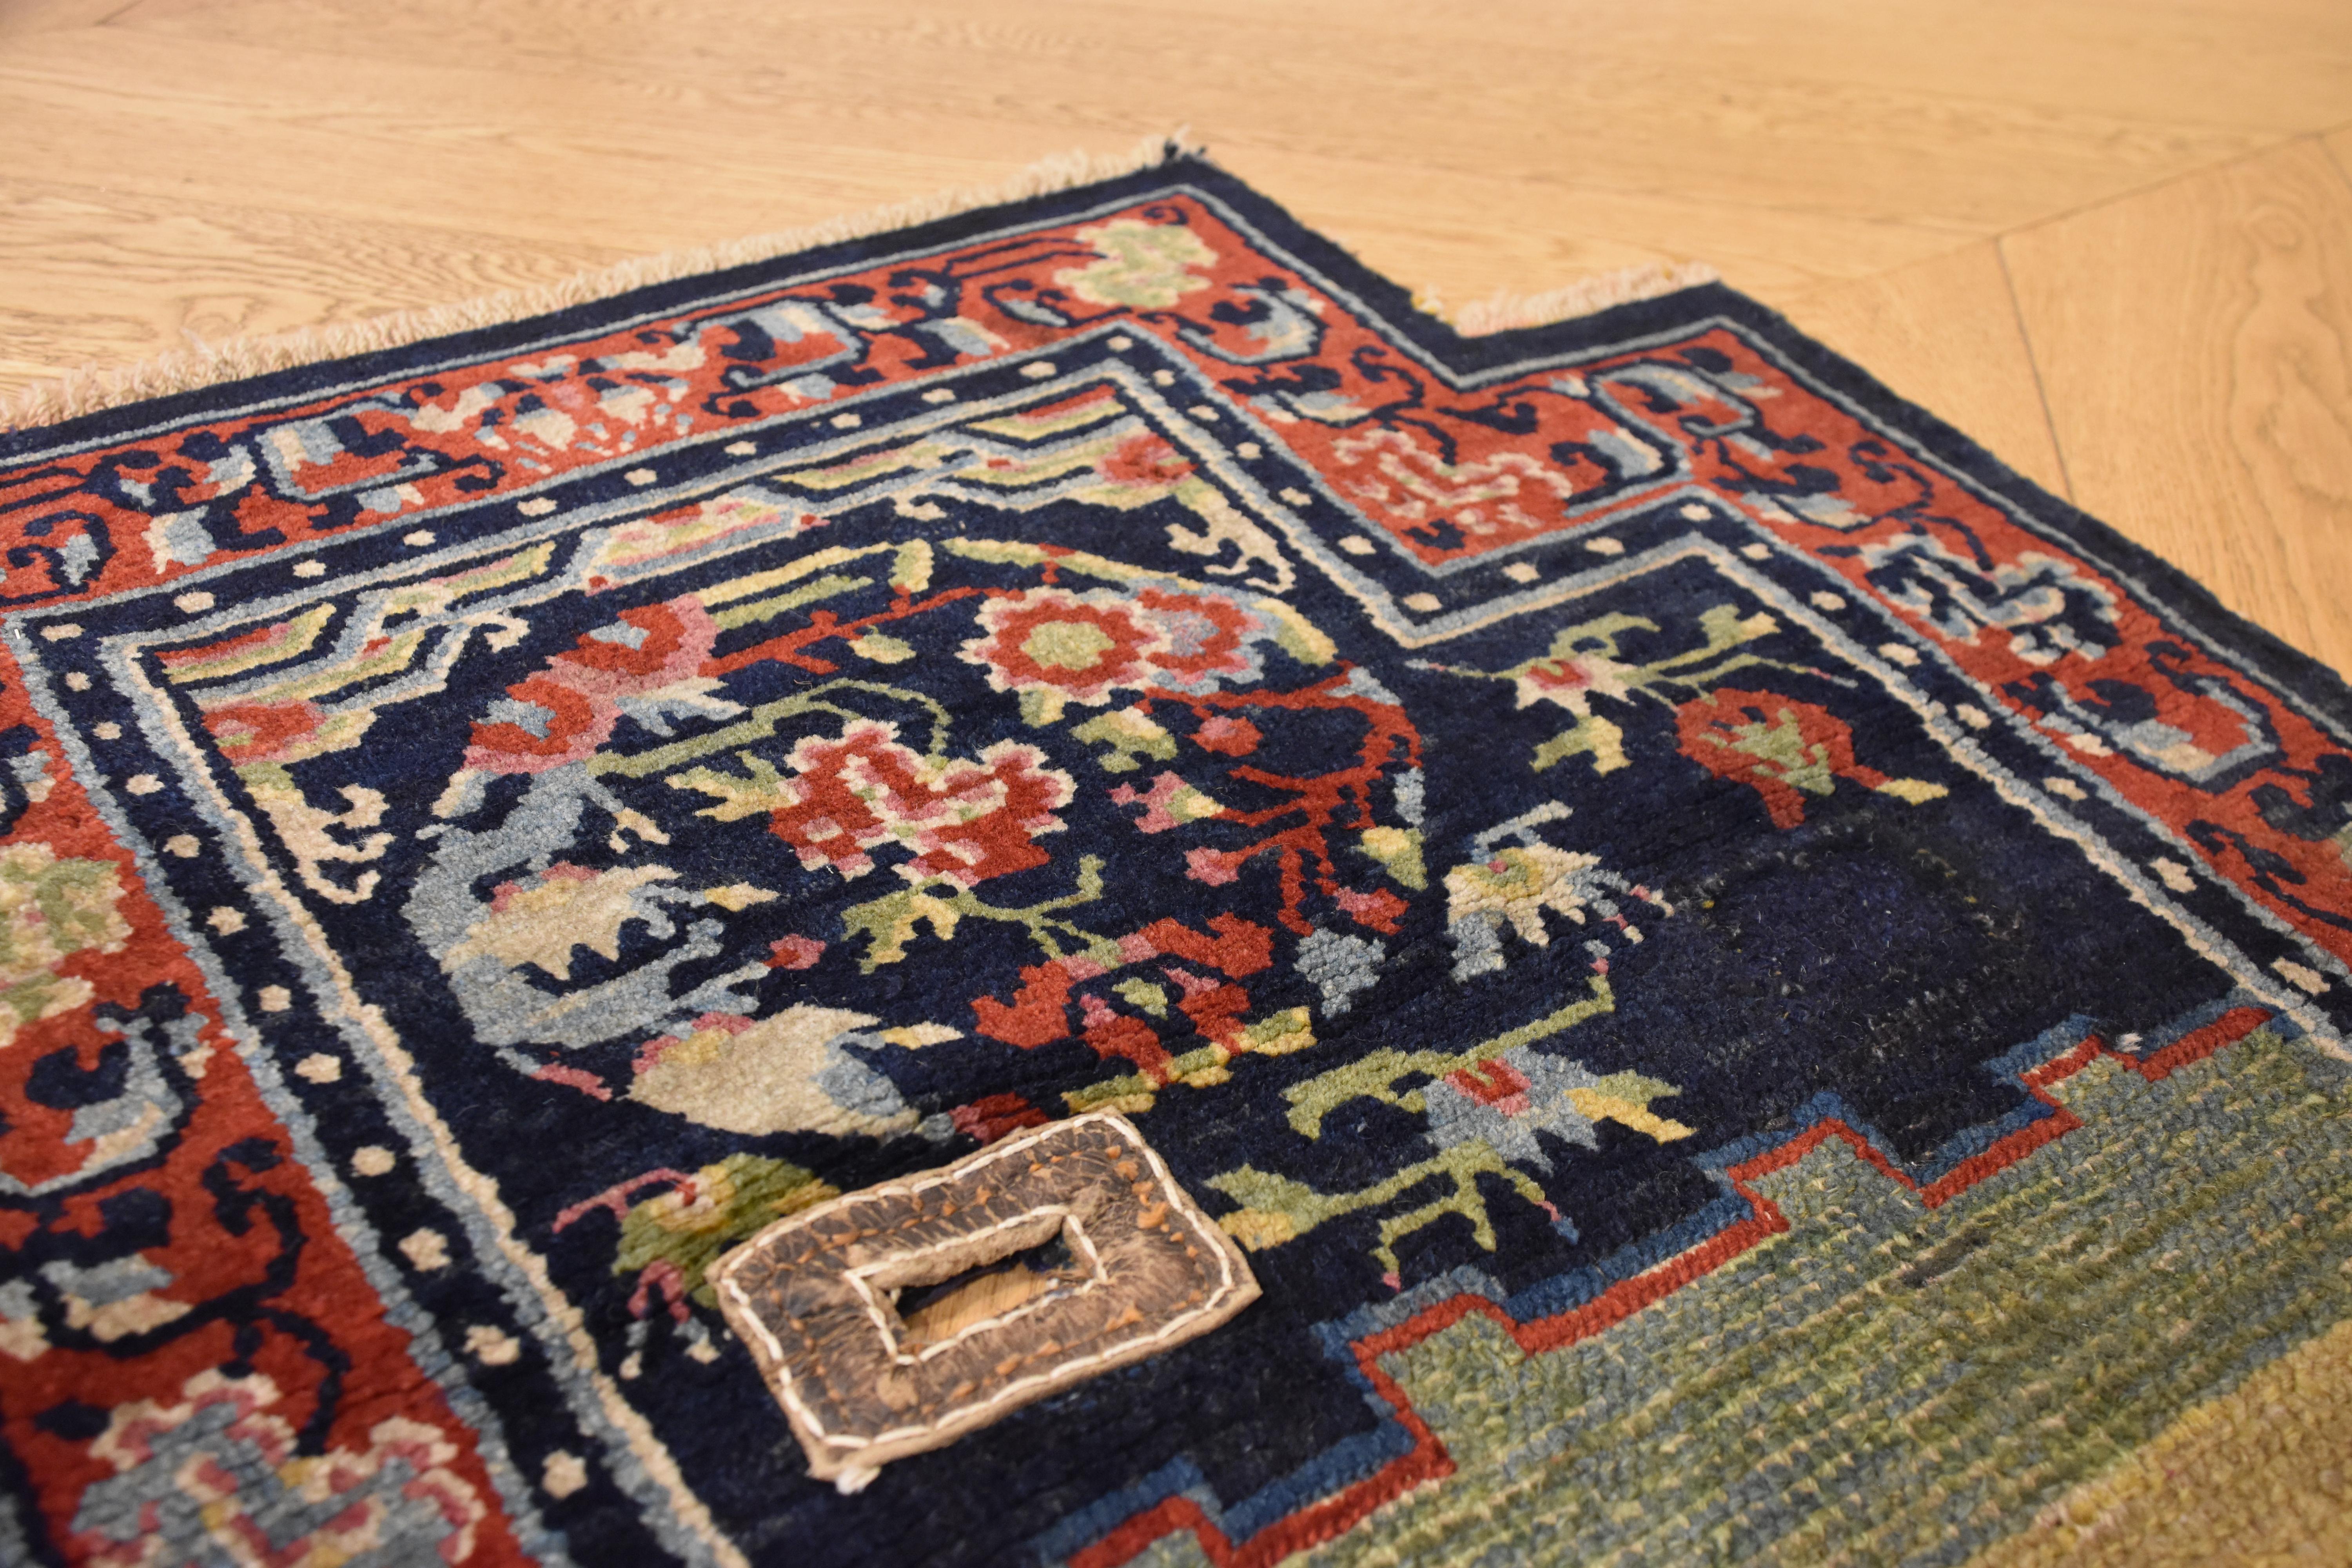 19th Century Peony Flower Medallions Blue Green and Red Saddle Horse Tibetan Rug For Sale 4